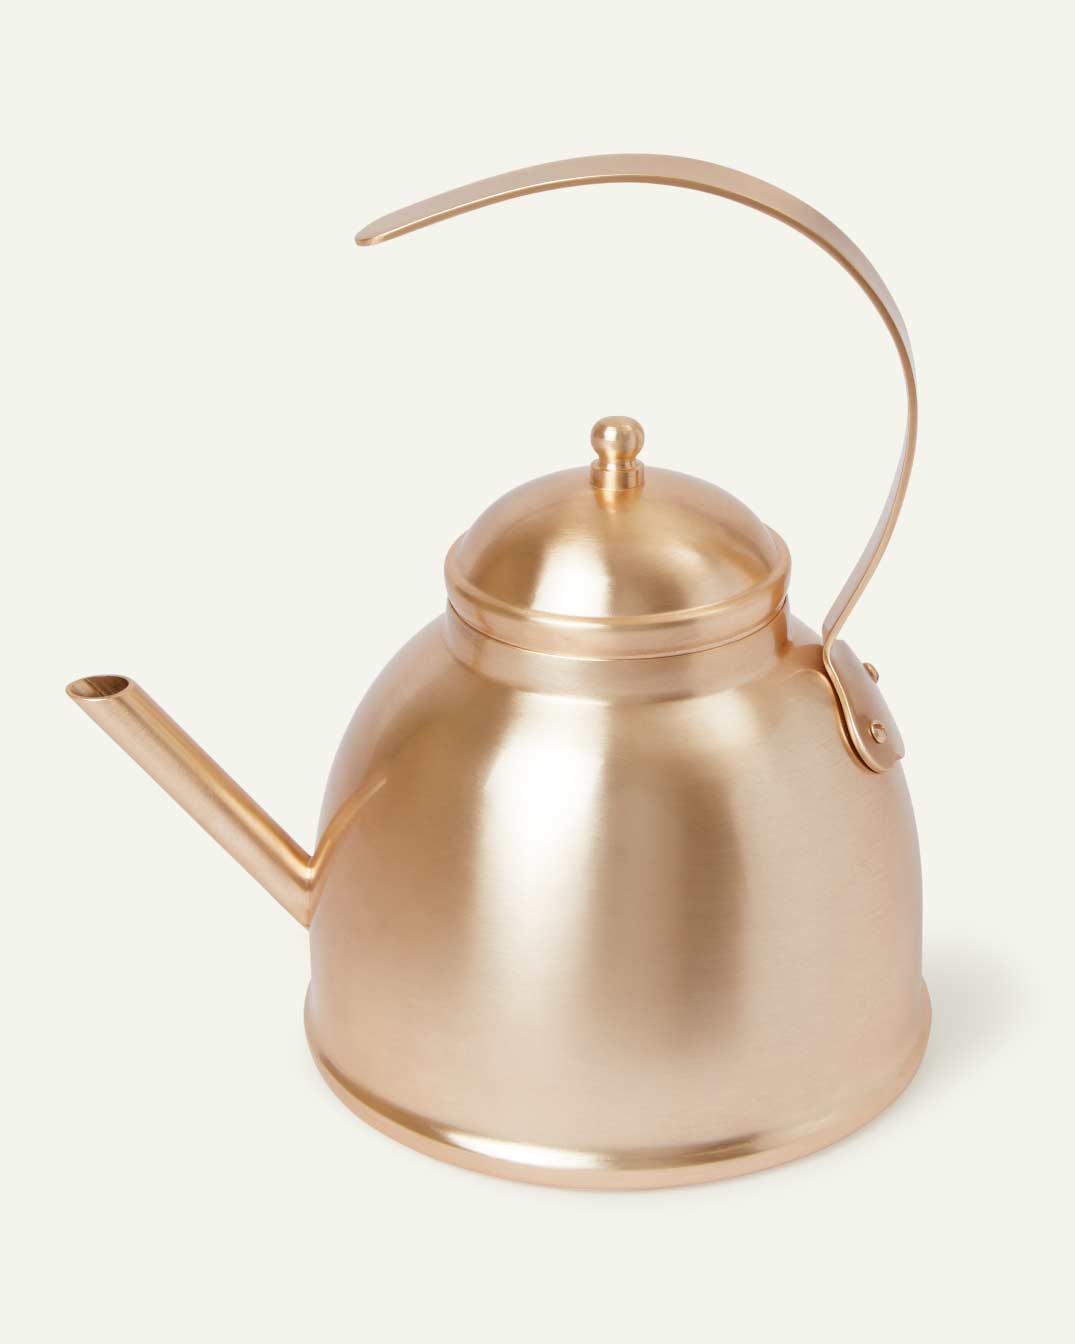 Alltrue Is Recalling the Tea Kettle From Their Winter 2020 Box Due to Burns